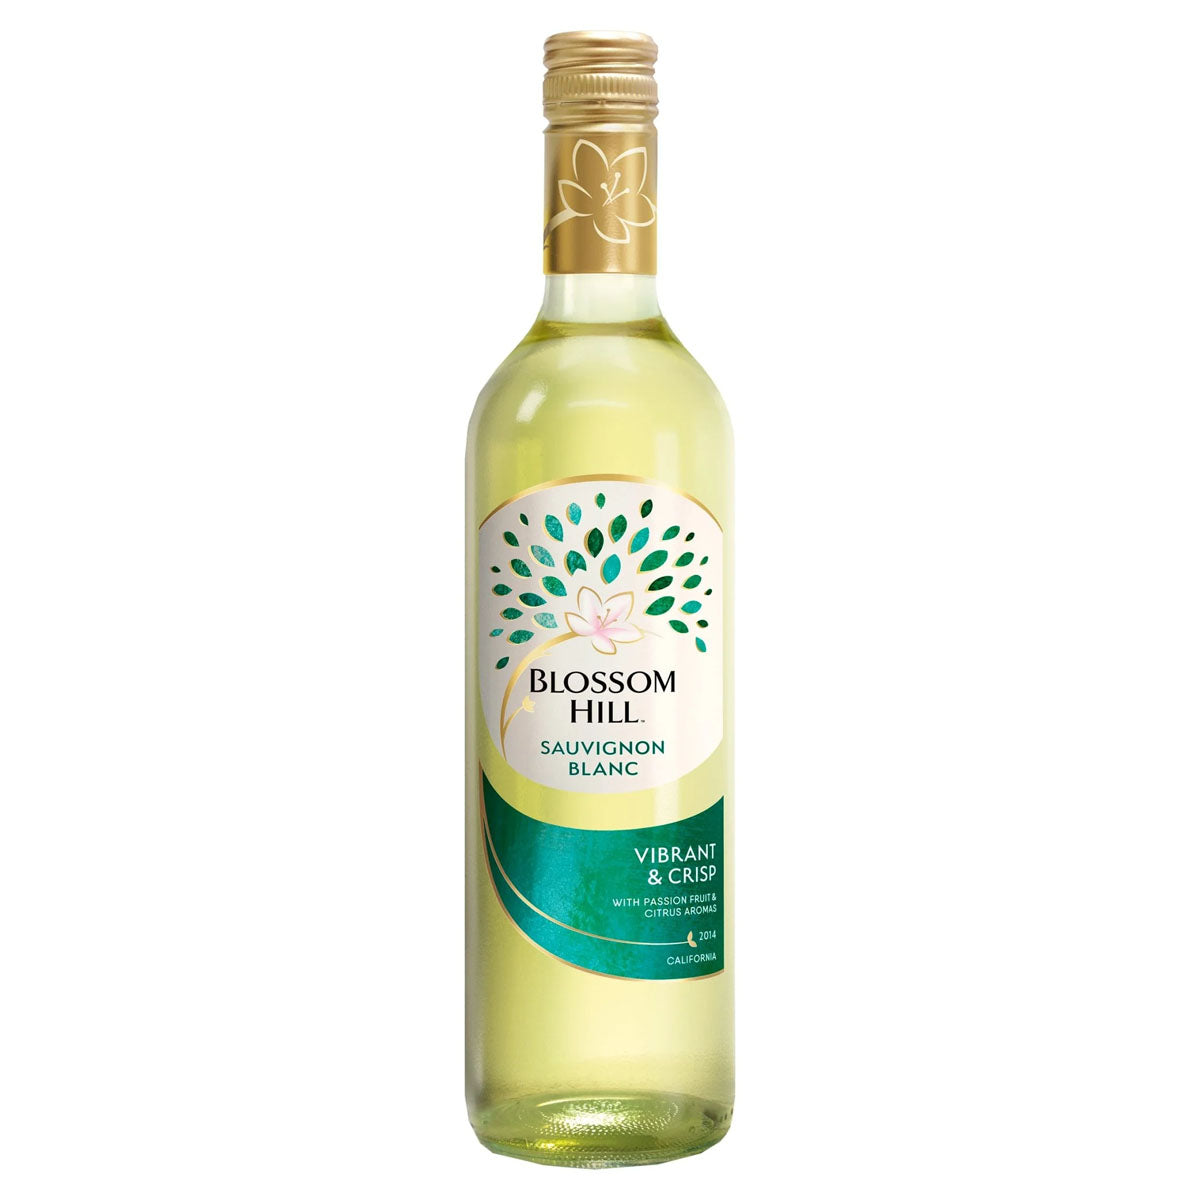 A bottle of Blossom Hill - Sauvignon Blanc (10.5% ABV) - 750ml on a white background.